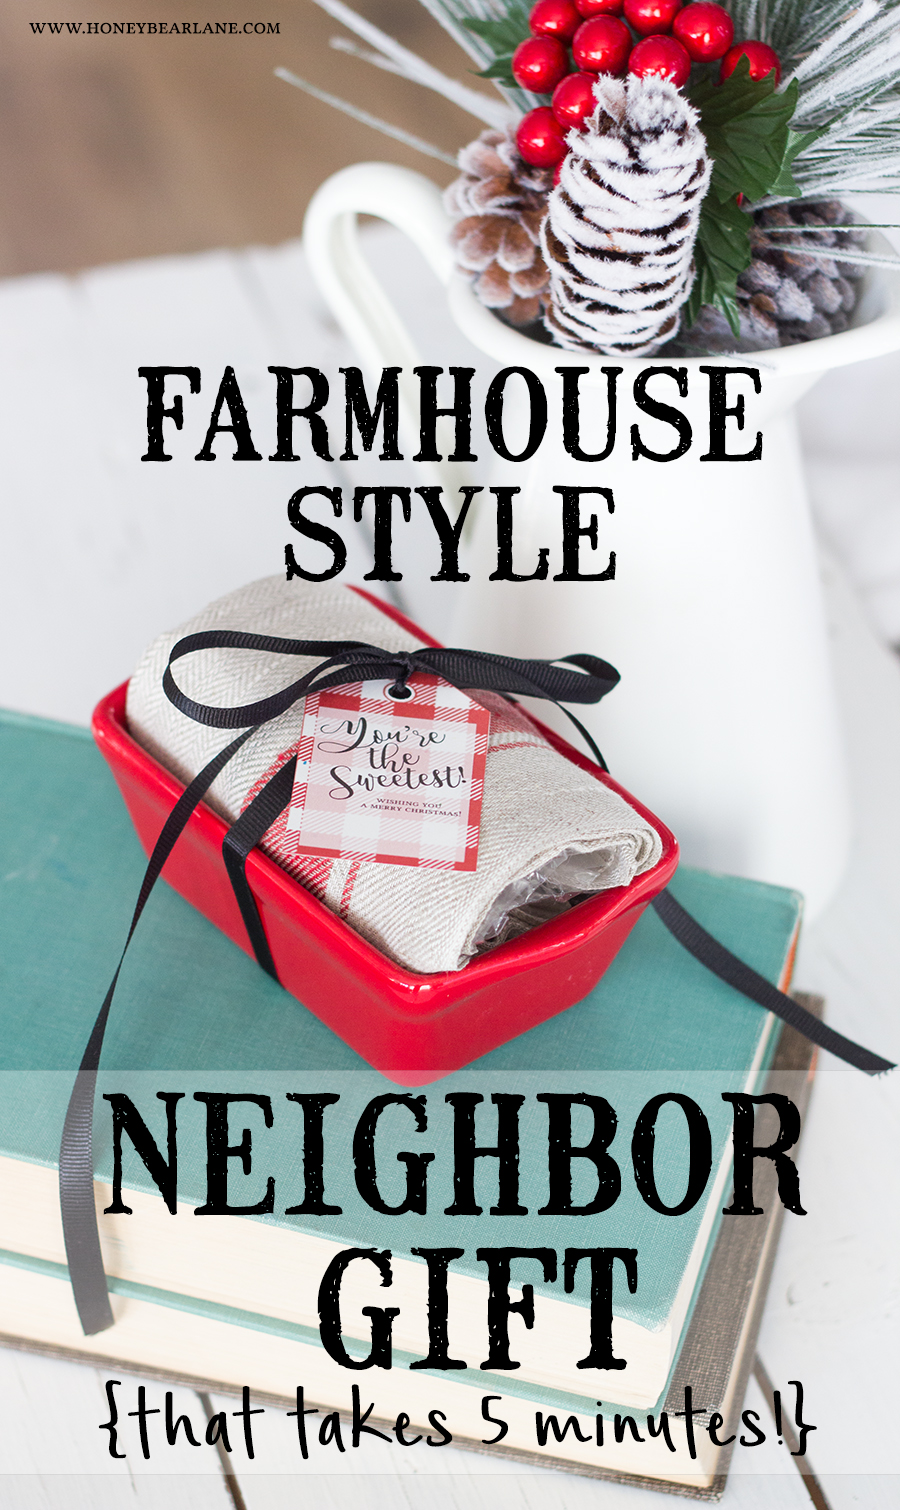 Easy Neighbor Gifts under $5 with Free Festive Gift Tags - Design